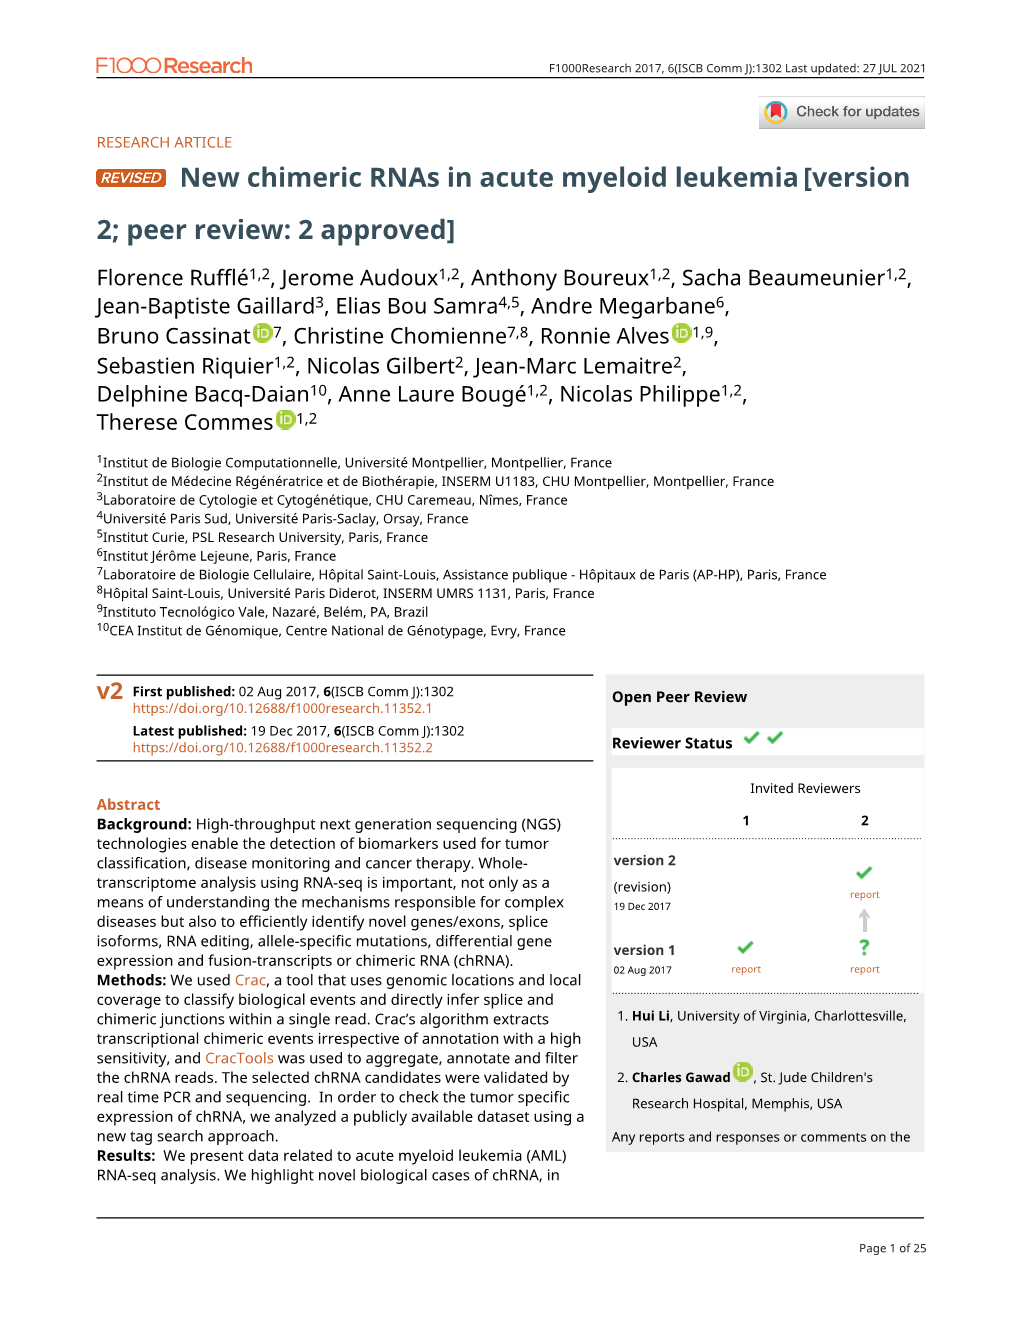 New Chimeric Rnas in Acute Myeloid Leukemia[Version 2; Peer Review: 2 Approved]